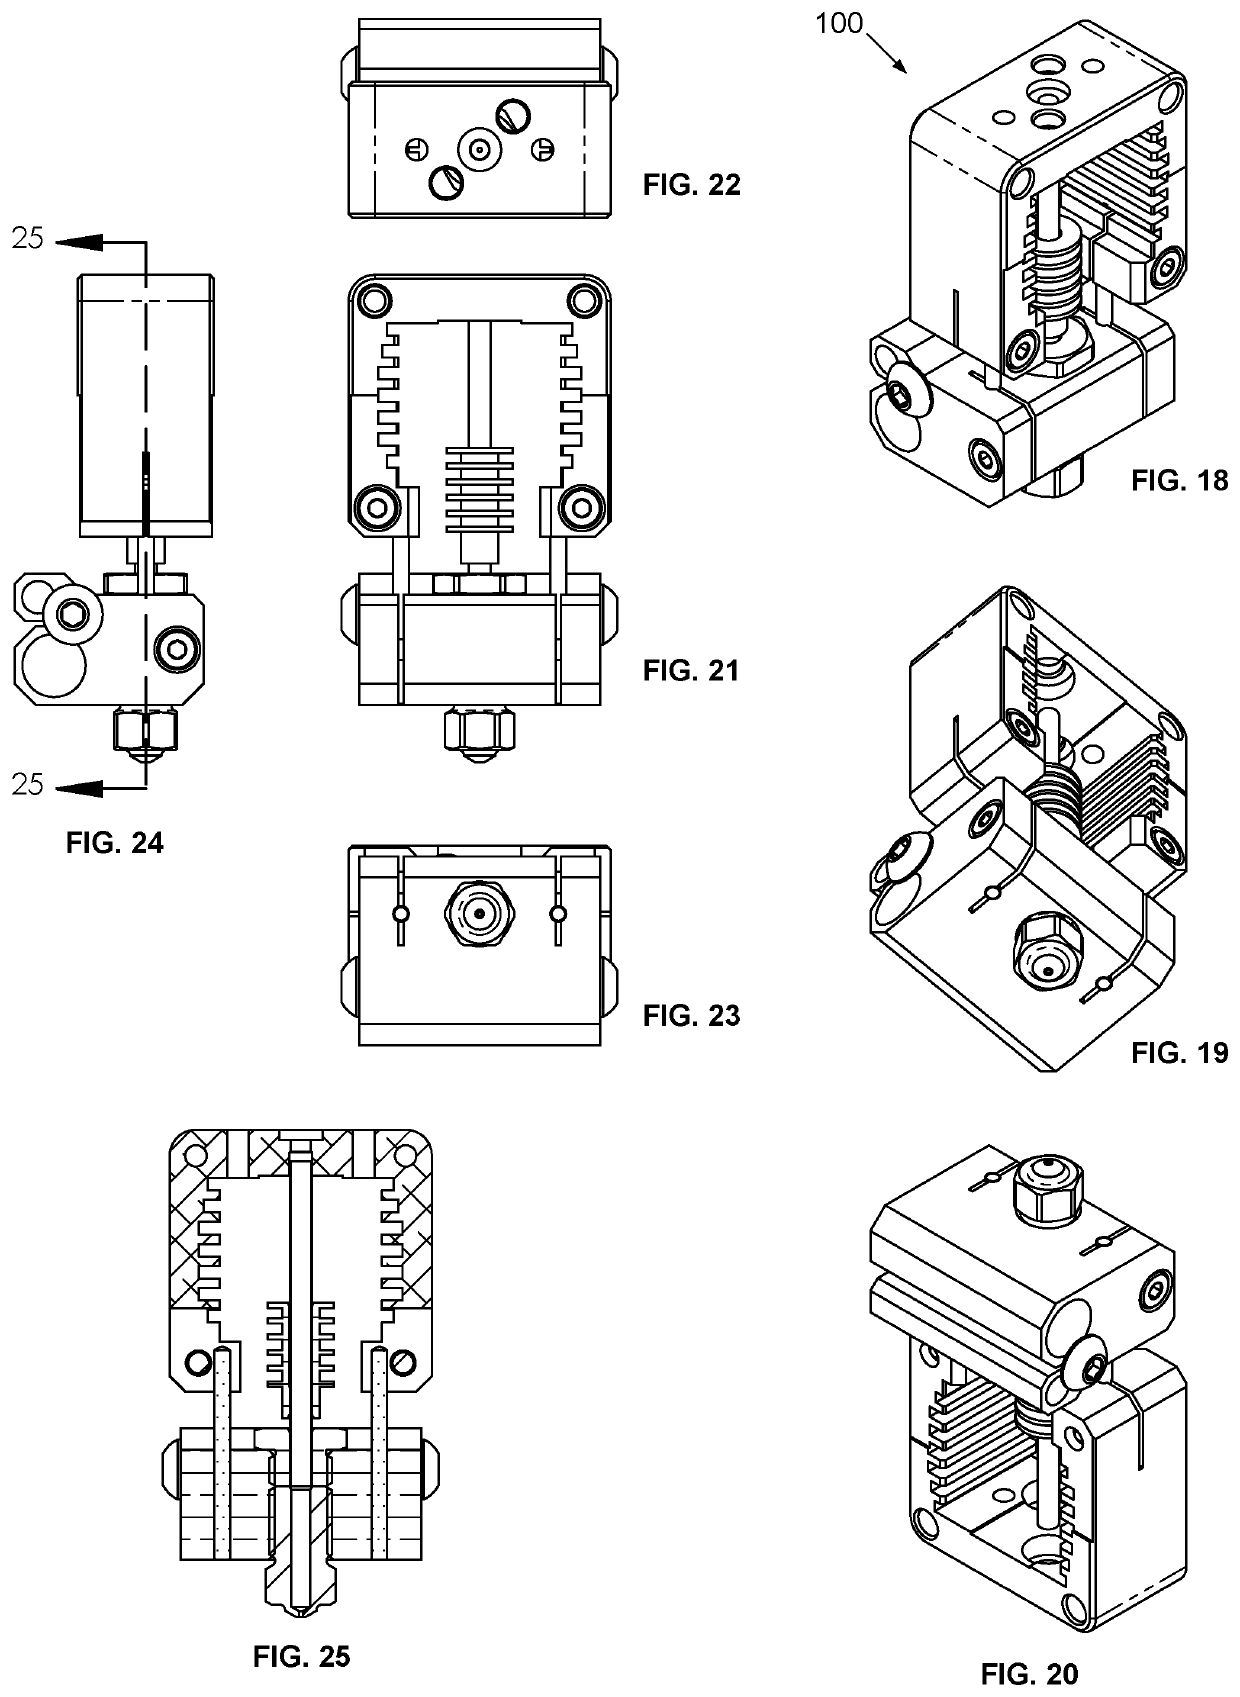 Adaptable high-performance extrusion head for fused filament fabrication systems